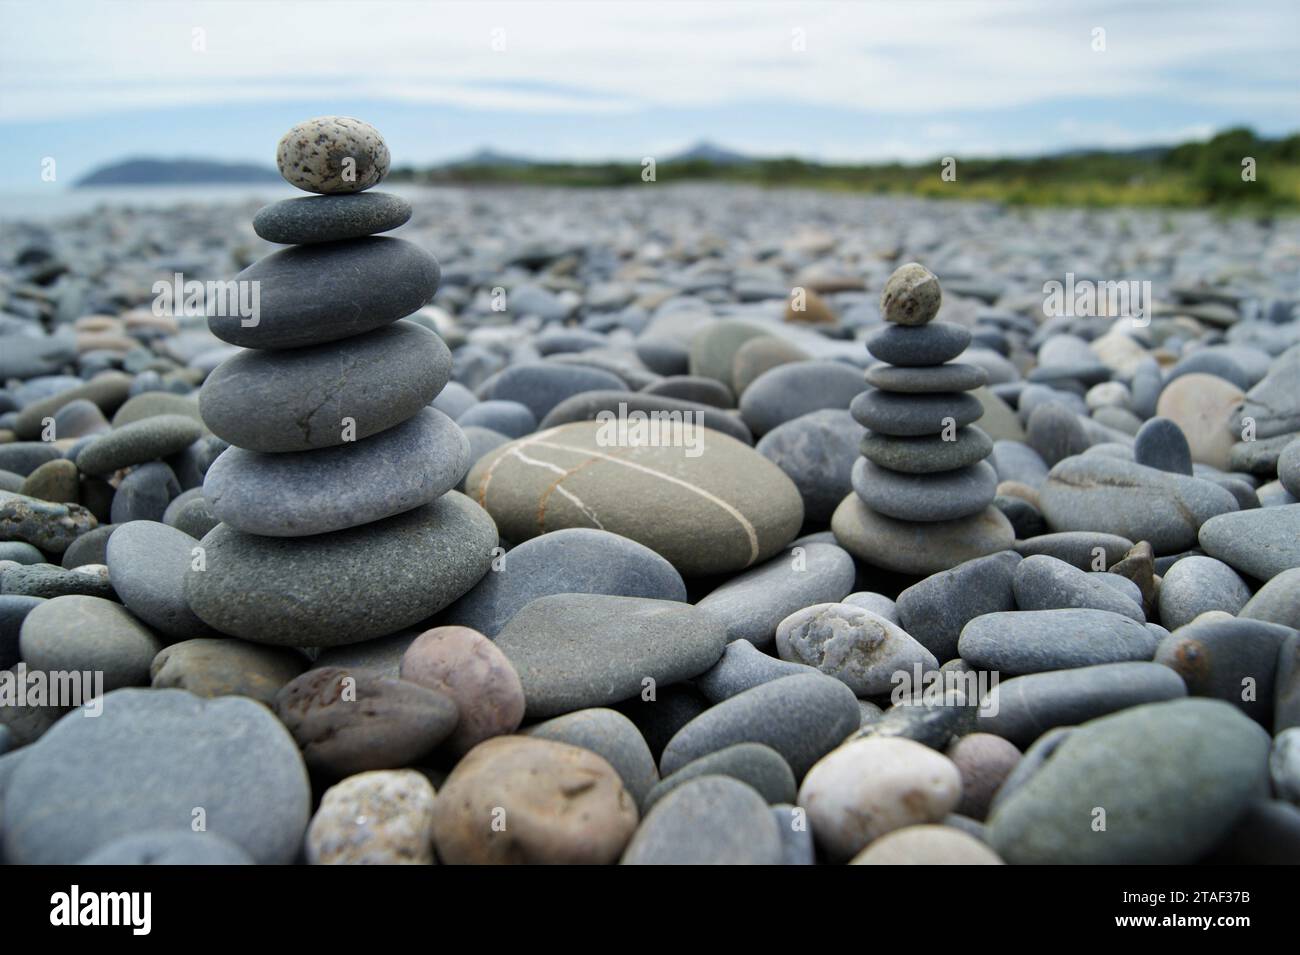 Towers made of pebbles. Two Zen towers on a stony beach. Stock Photo